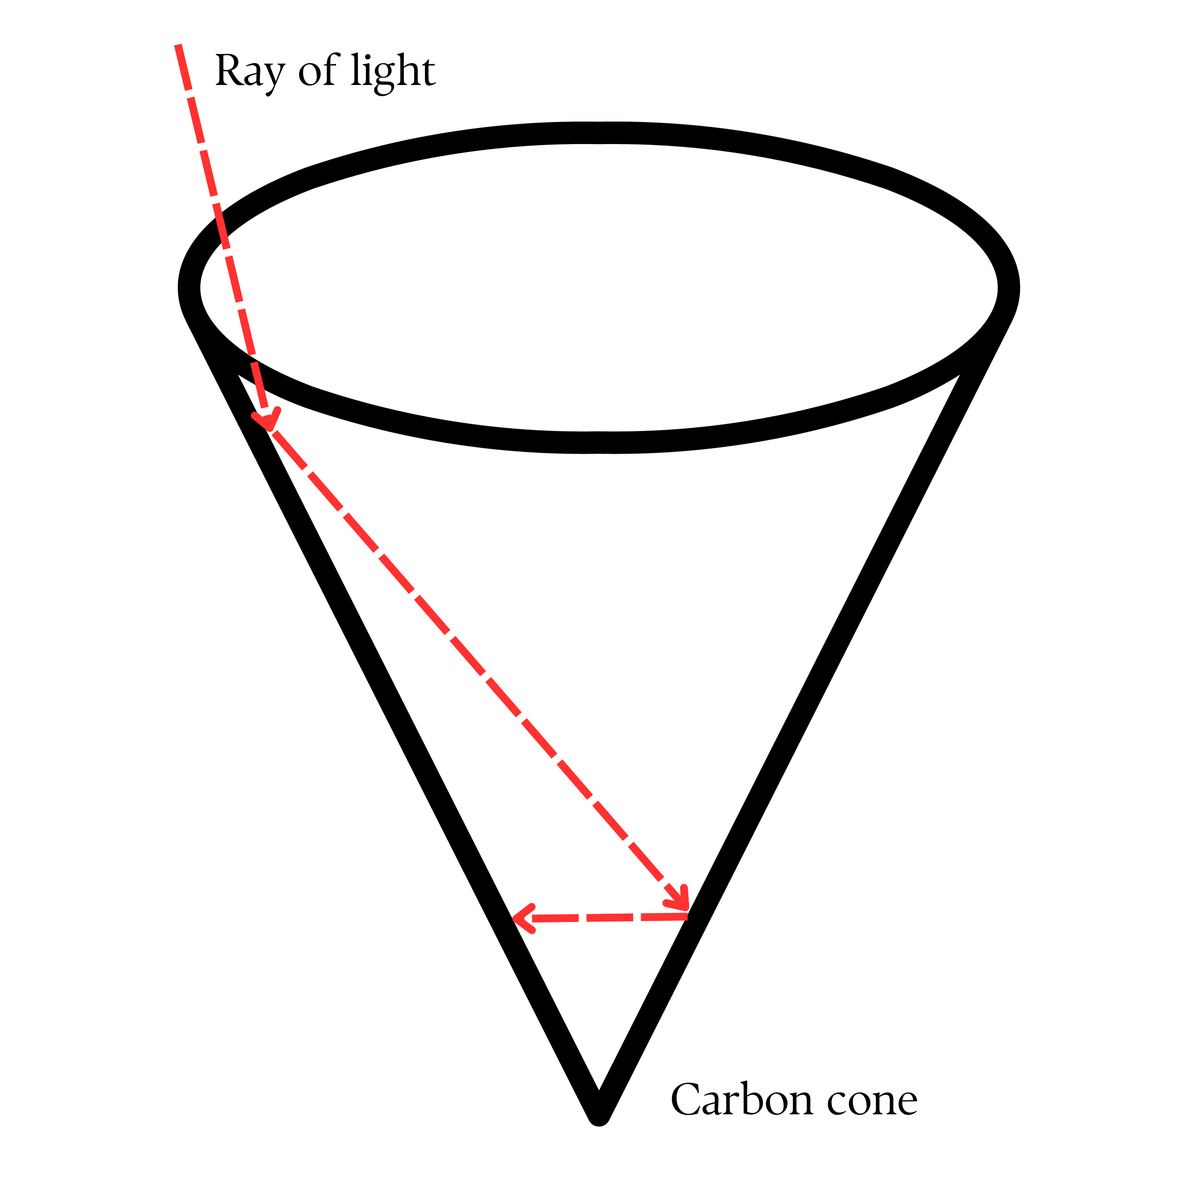 A simple schematic diagram showing the path of sunlight insight a carbon nanofloret.